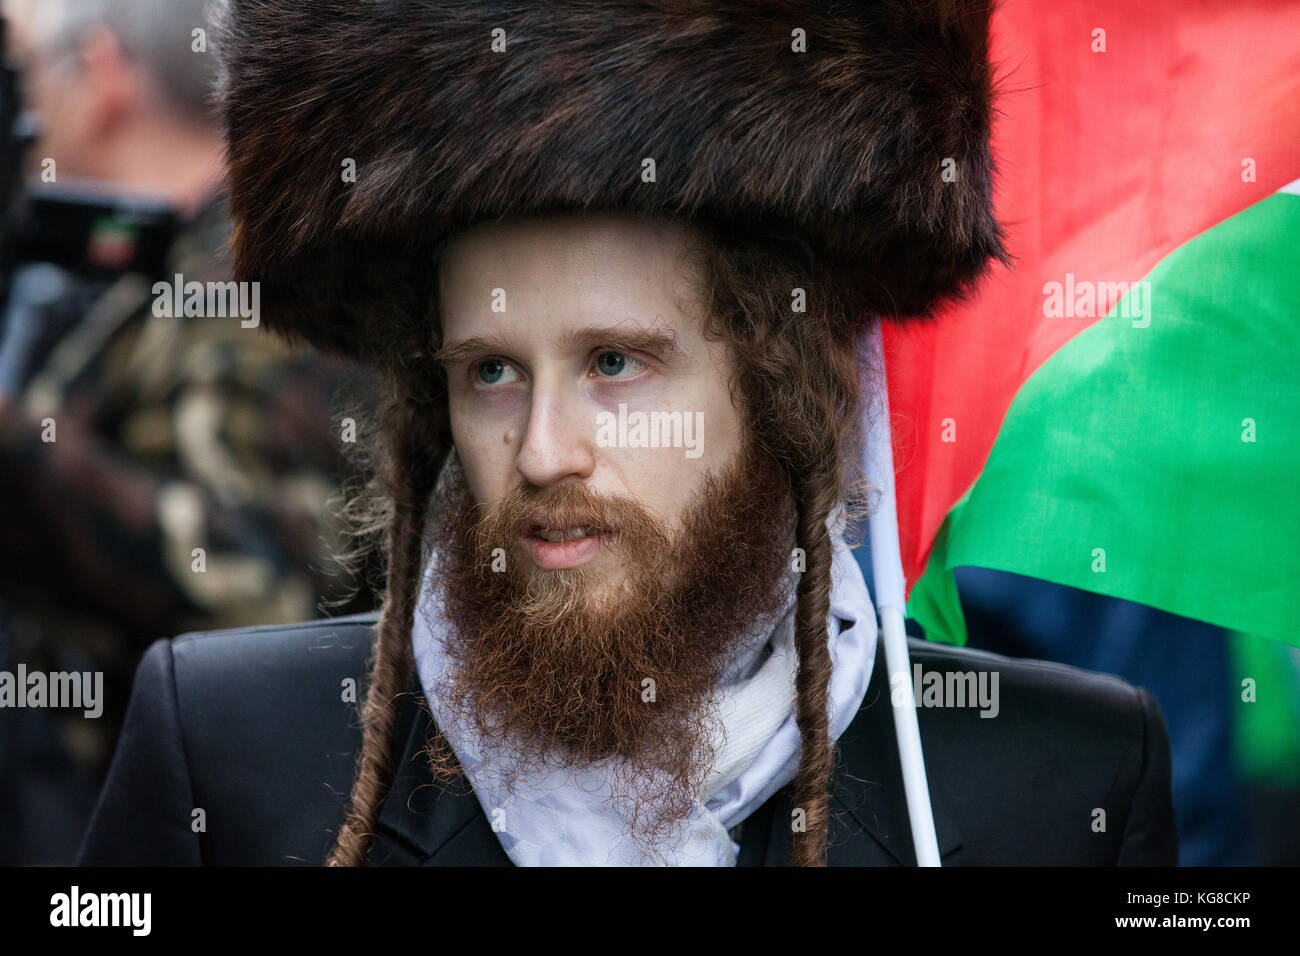 London, UK. 4th November, 2017. A member of Orthodox Jewish group Neturei Karta marches with other campaigners for Palestine through London to demand justice and equal rights for Palestinians two days after the 100th anniversary of the Balfour Declaration on 2nd November 1917. The march and rally were organised by Palestine Solidarity Campaign, Stop The War Coalition, Palestinian Forum in Britain, Friends of Al Aqsa and the Muslim Association of Britain. Credit: Mark Kerrison/Alamy Live News Stock Photo